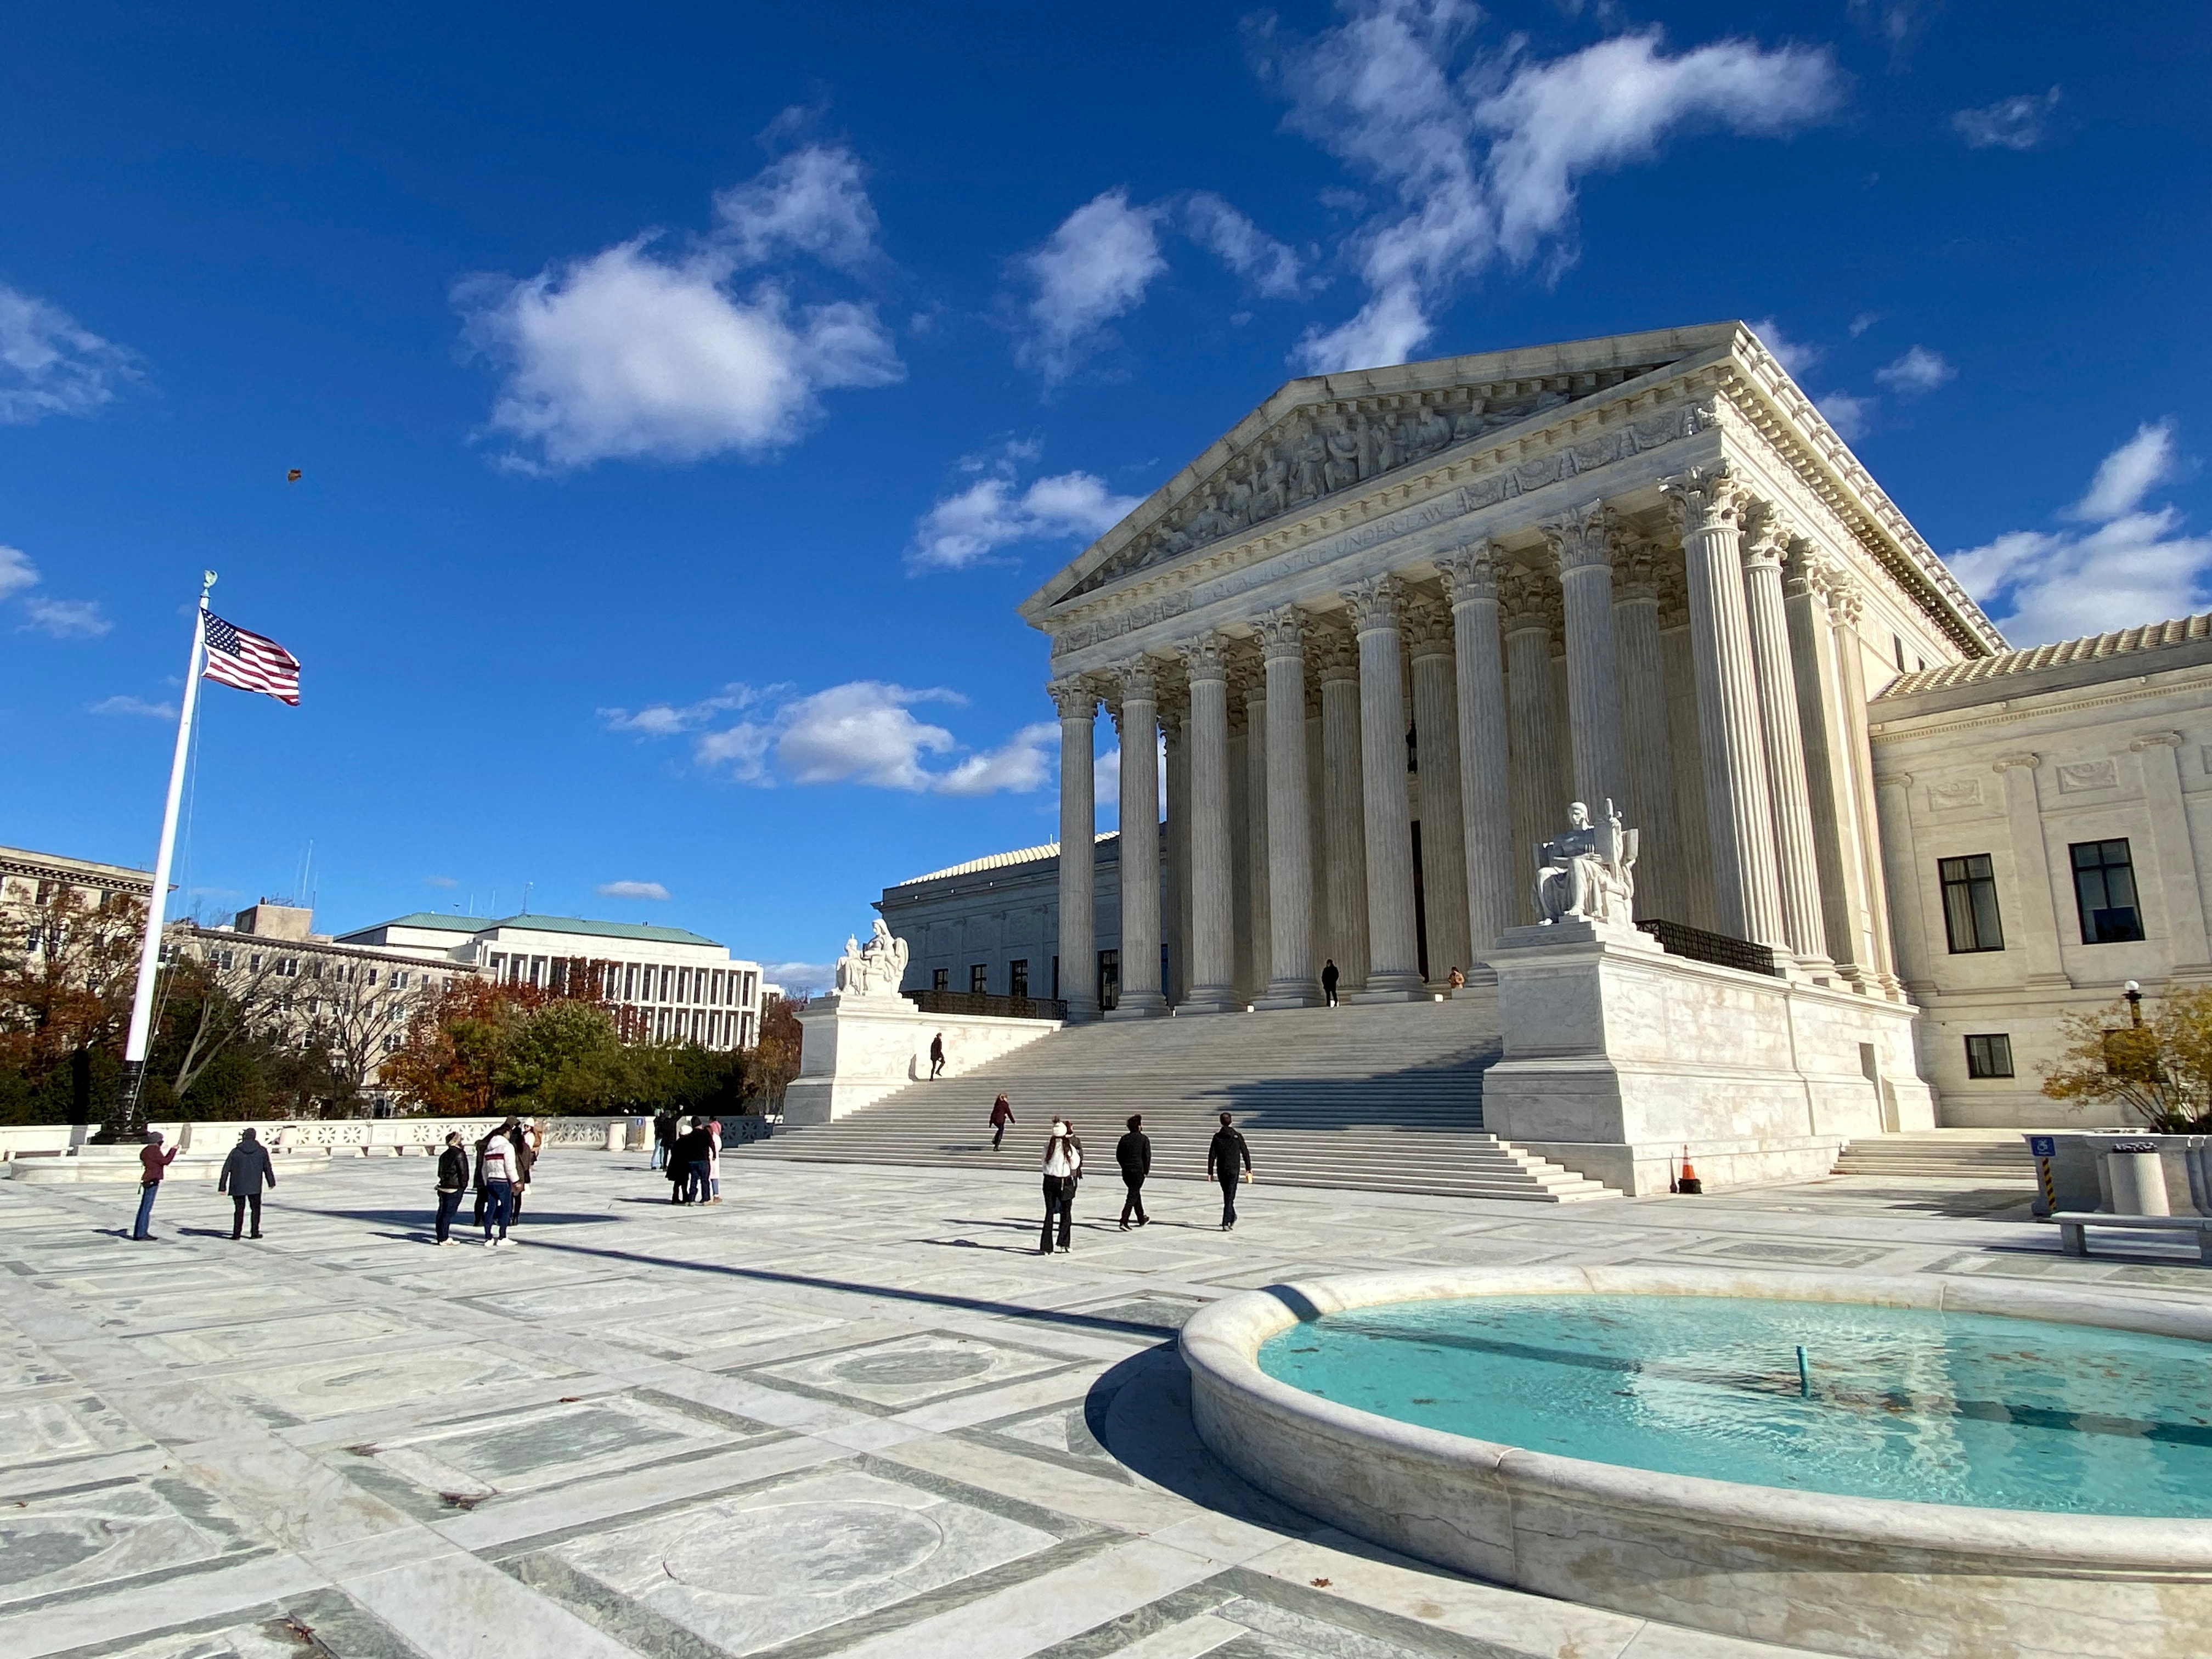 U.S. Supreme Court takes up clash between religion and LGBT rights | Reuters